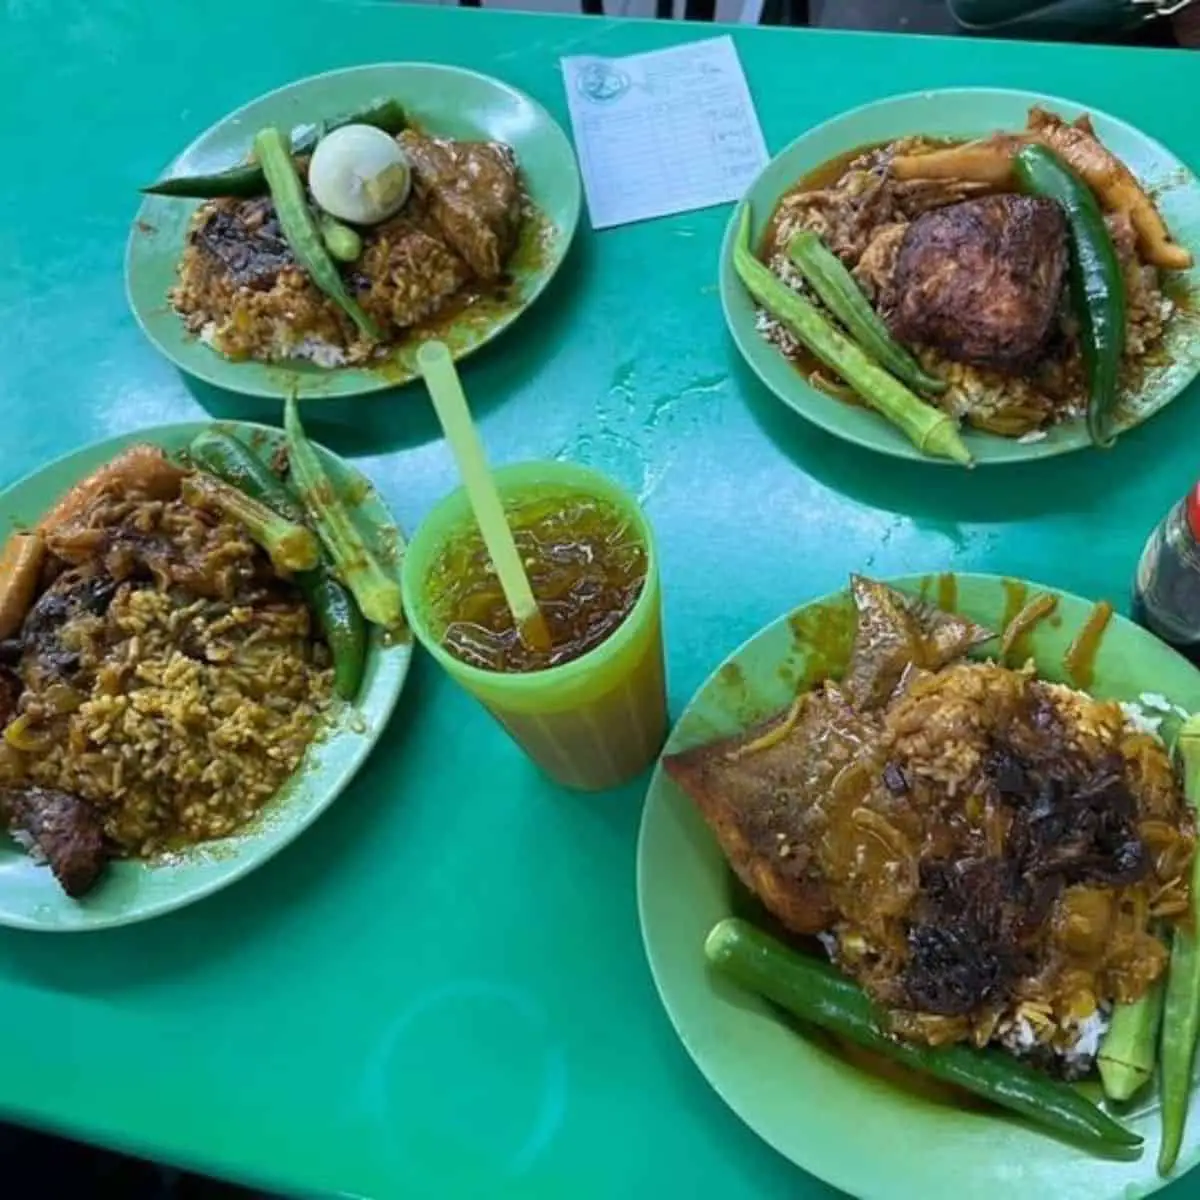  Four servings of Nasi Kandar from Kampung Melayu in a green plate and green table with one iced cold tea drink